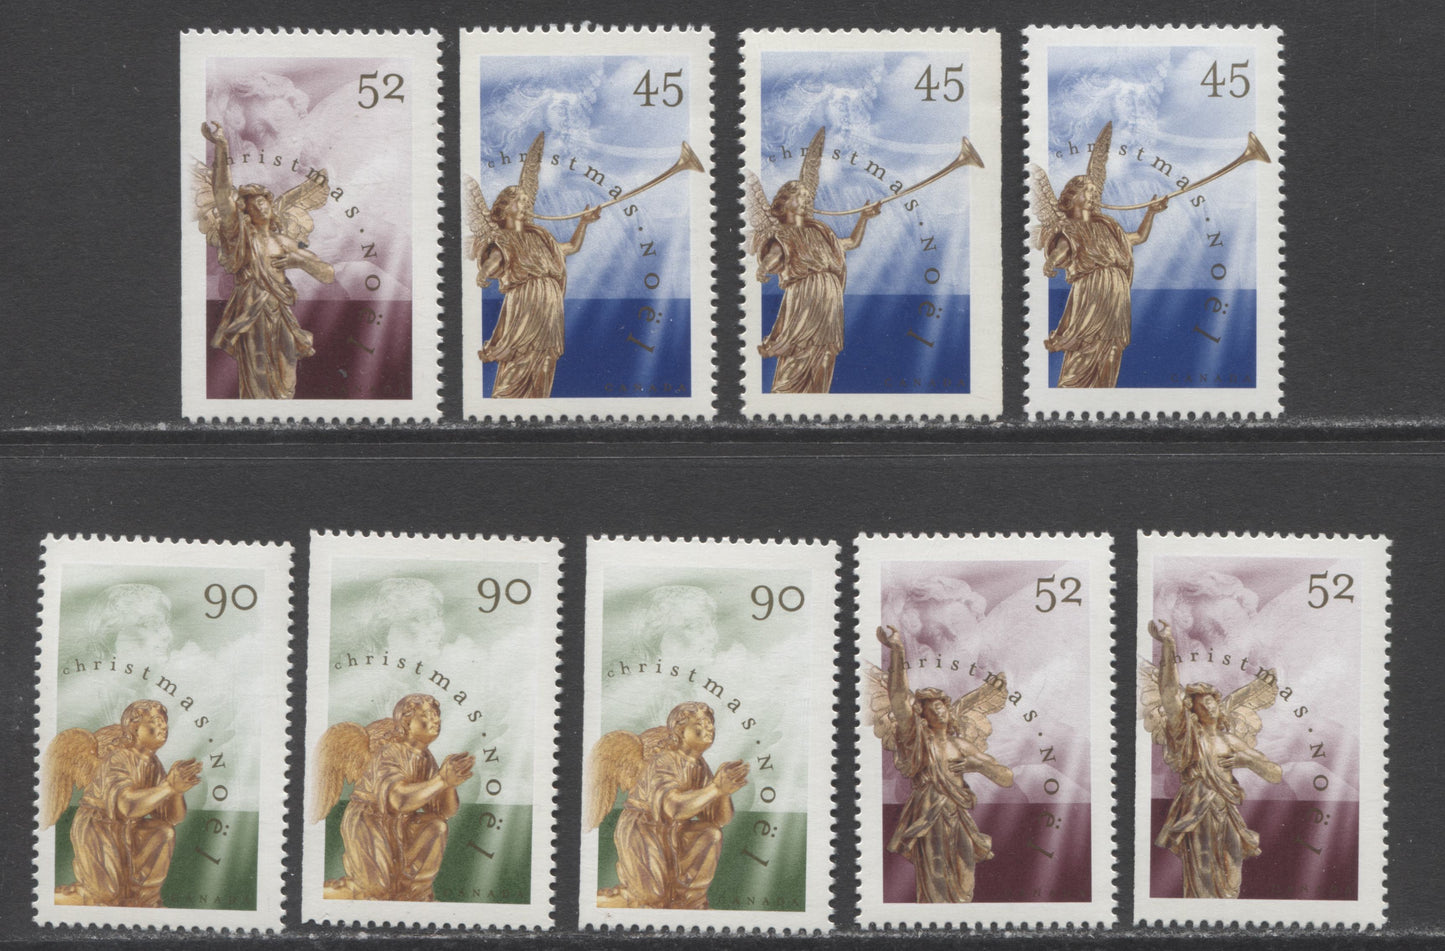 Lot 418 Canada #1764-1766, 1764as-1766as, 1764cs-1766b 45c-90c Multicolored Angel of the Last Judgement - Praying Angel, 1998 Christmas, 9 VFNH Sheet & Booklet Singles With Perfs 13.1 & 13.1 x 13.6